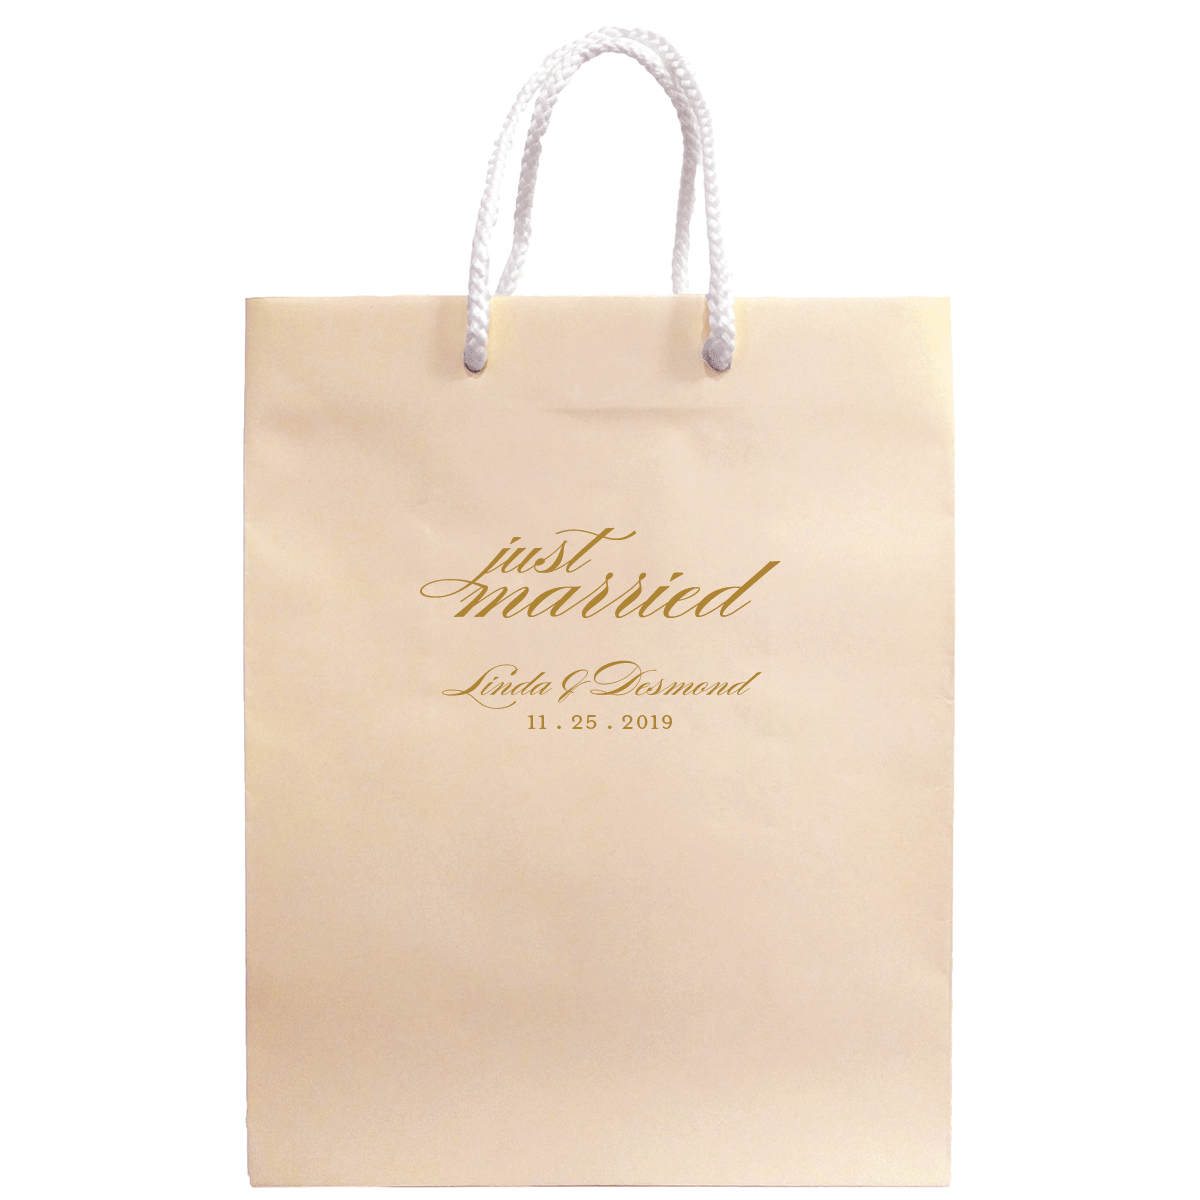 Just Married Wedding Welcome Bags - Personalized Gift Bag - Audrey Collection - Tea and Becky